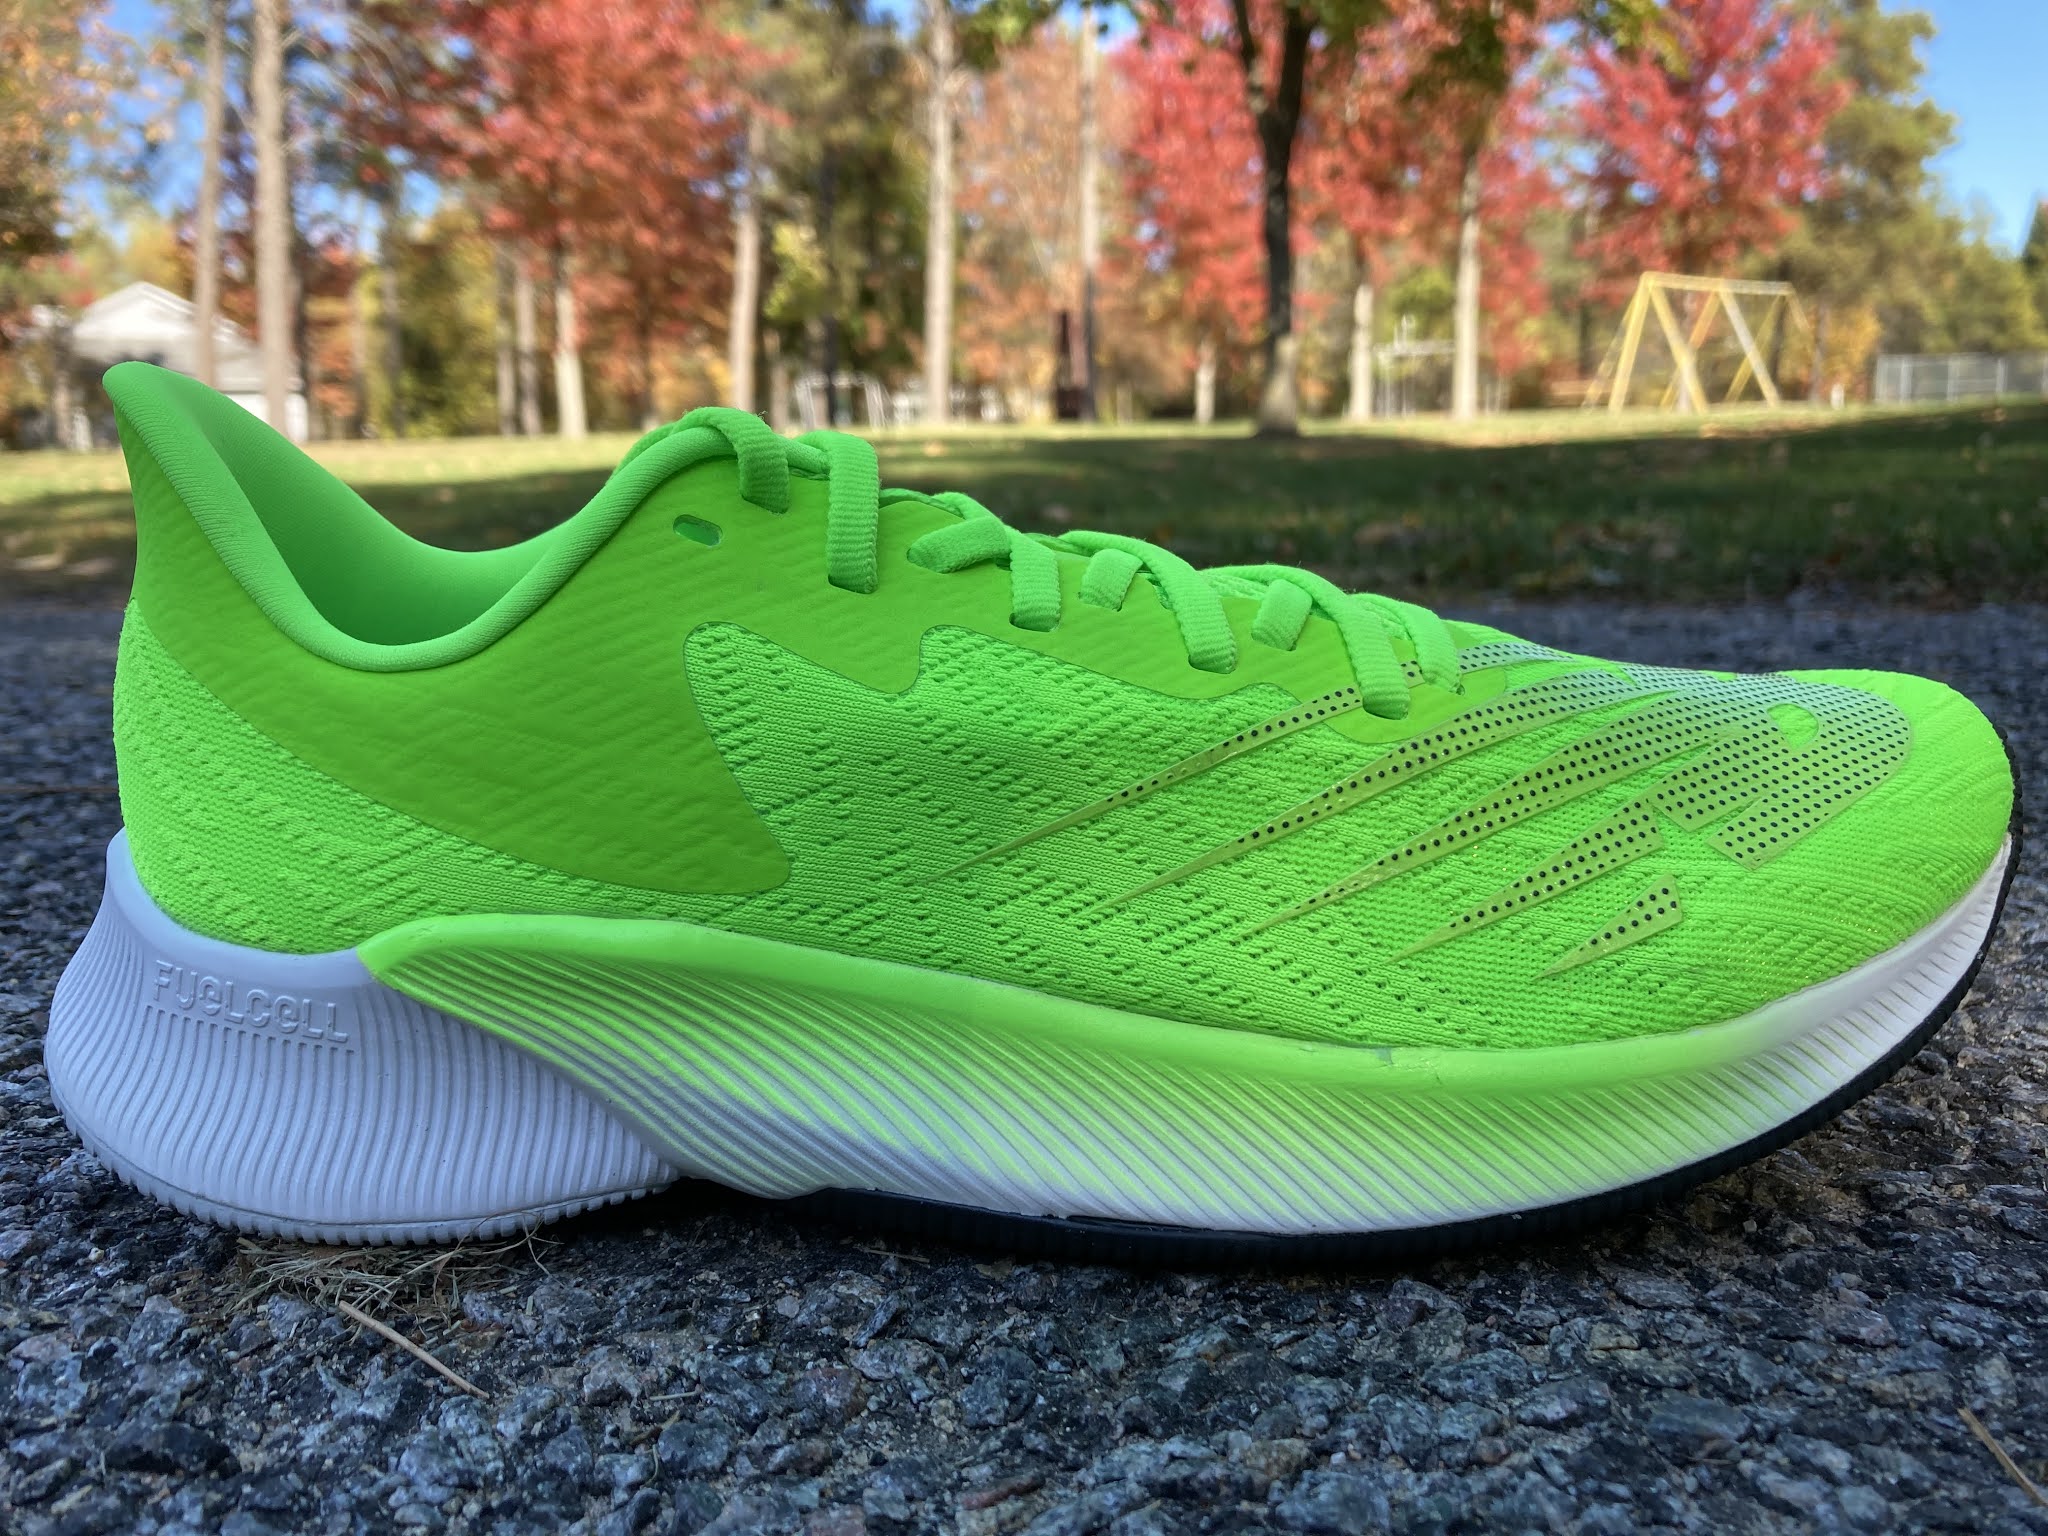 New Balance FuelCell Prism Initial Review - DOCTORS OF RUNNING